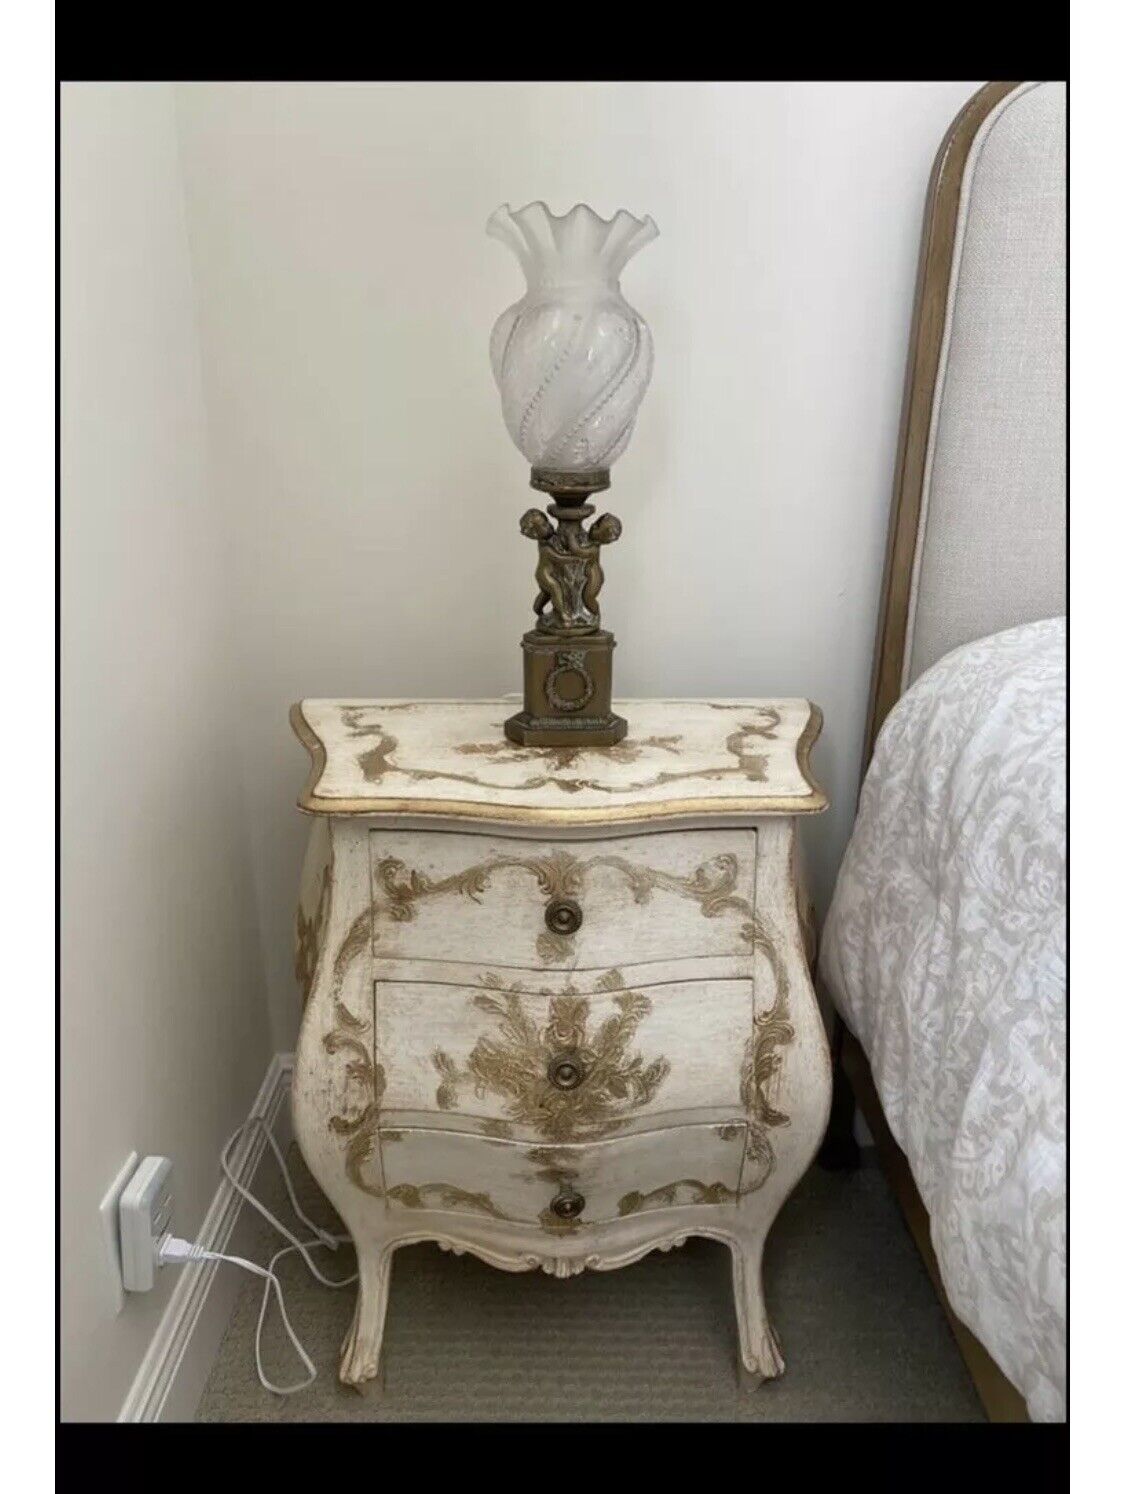 PAIR CHERUB TABLE LAMPS W/SATIN GLASS SHADES ETCHED DETAILS “LQQK”